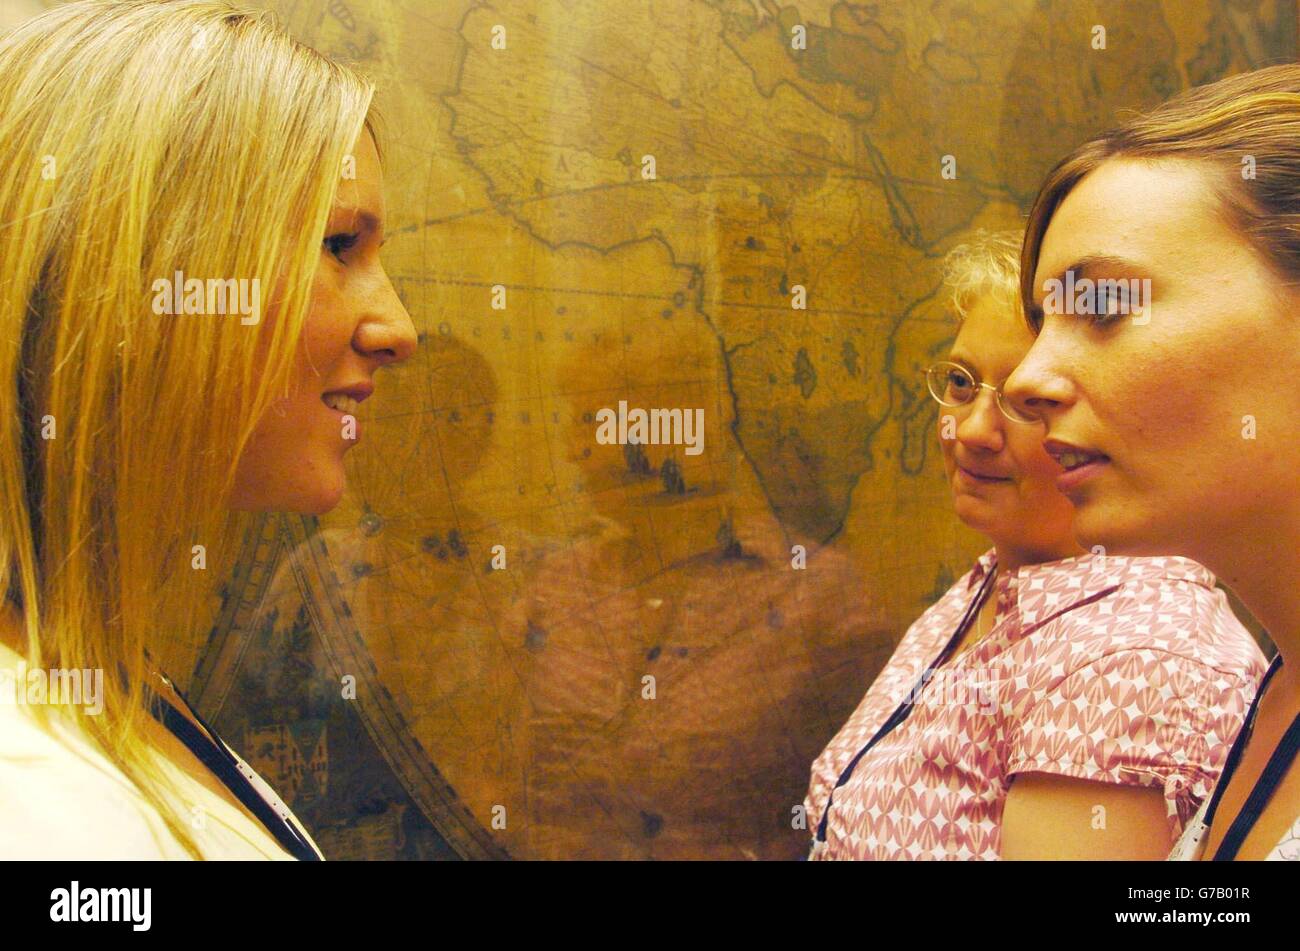 Sally Kettle (right), 27, from Northampton, talks to Claire Mills (left), 22, from Dunstable and Ali Boreham, 34, from Ingworth in Norfolk, in front of a world map inside the Royal Geographical Society in London, Wednesday August 18, 2004, as they discuss the challenges awaiting them of a rowing race across the Atlantic Ocean. The three women will be joined by Diane Parks, 44, as they begin training for next year's Atlantic Rowing Race between the Canary Islands and Barbados, with a total mileage of 2,900 nautical miles. Stock Photo